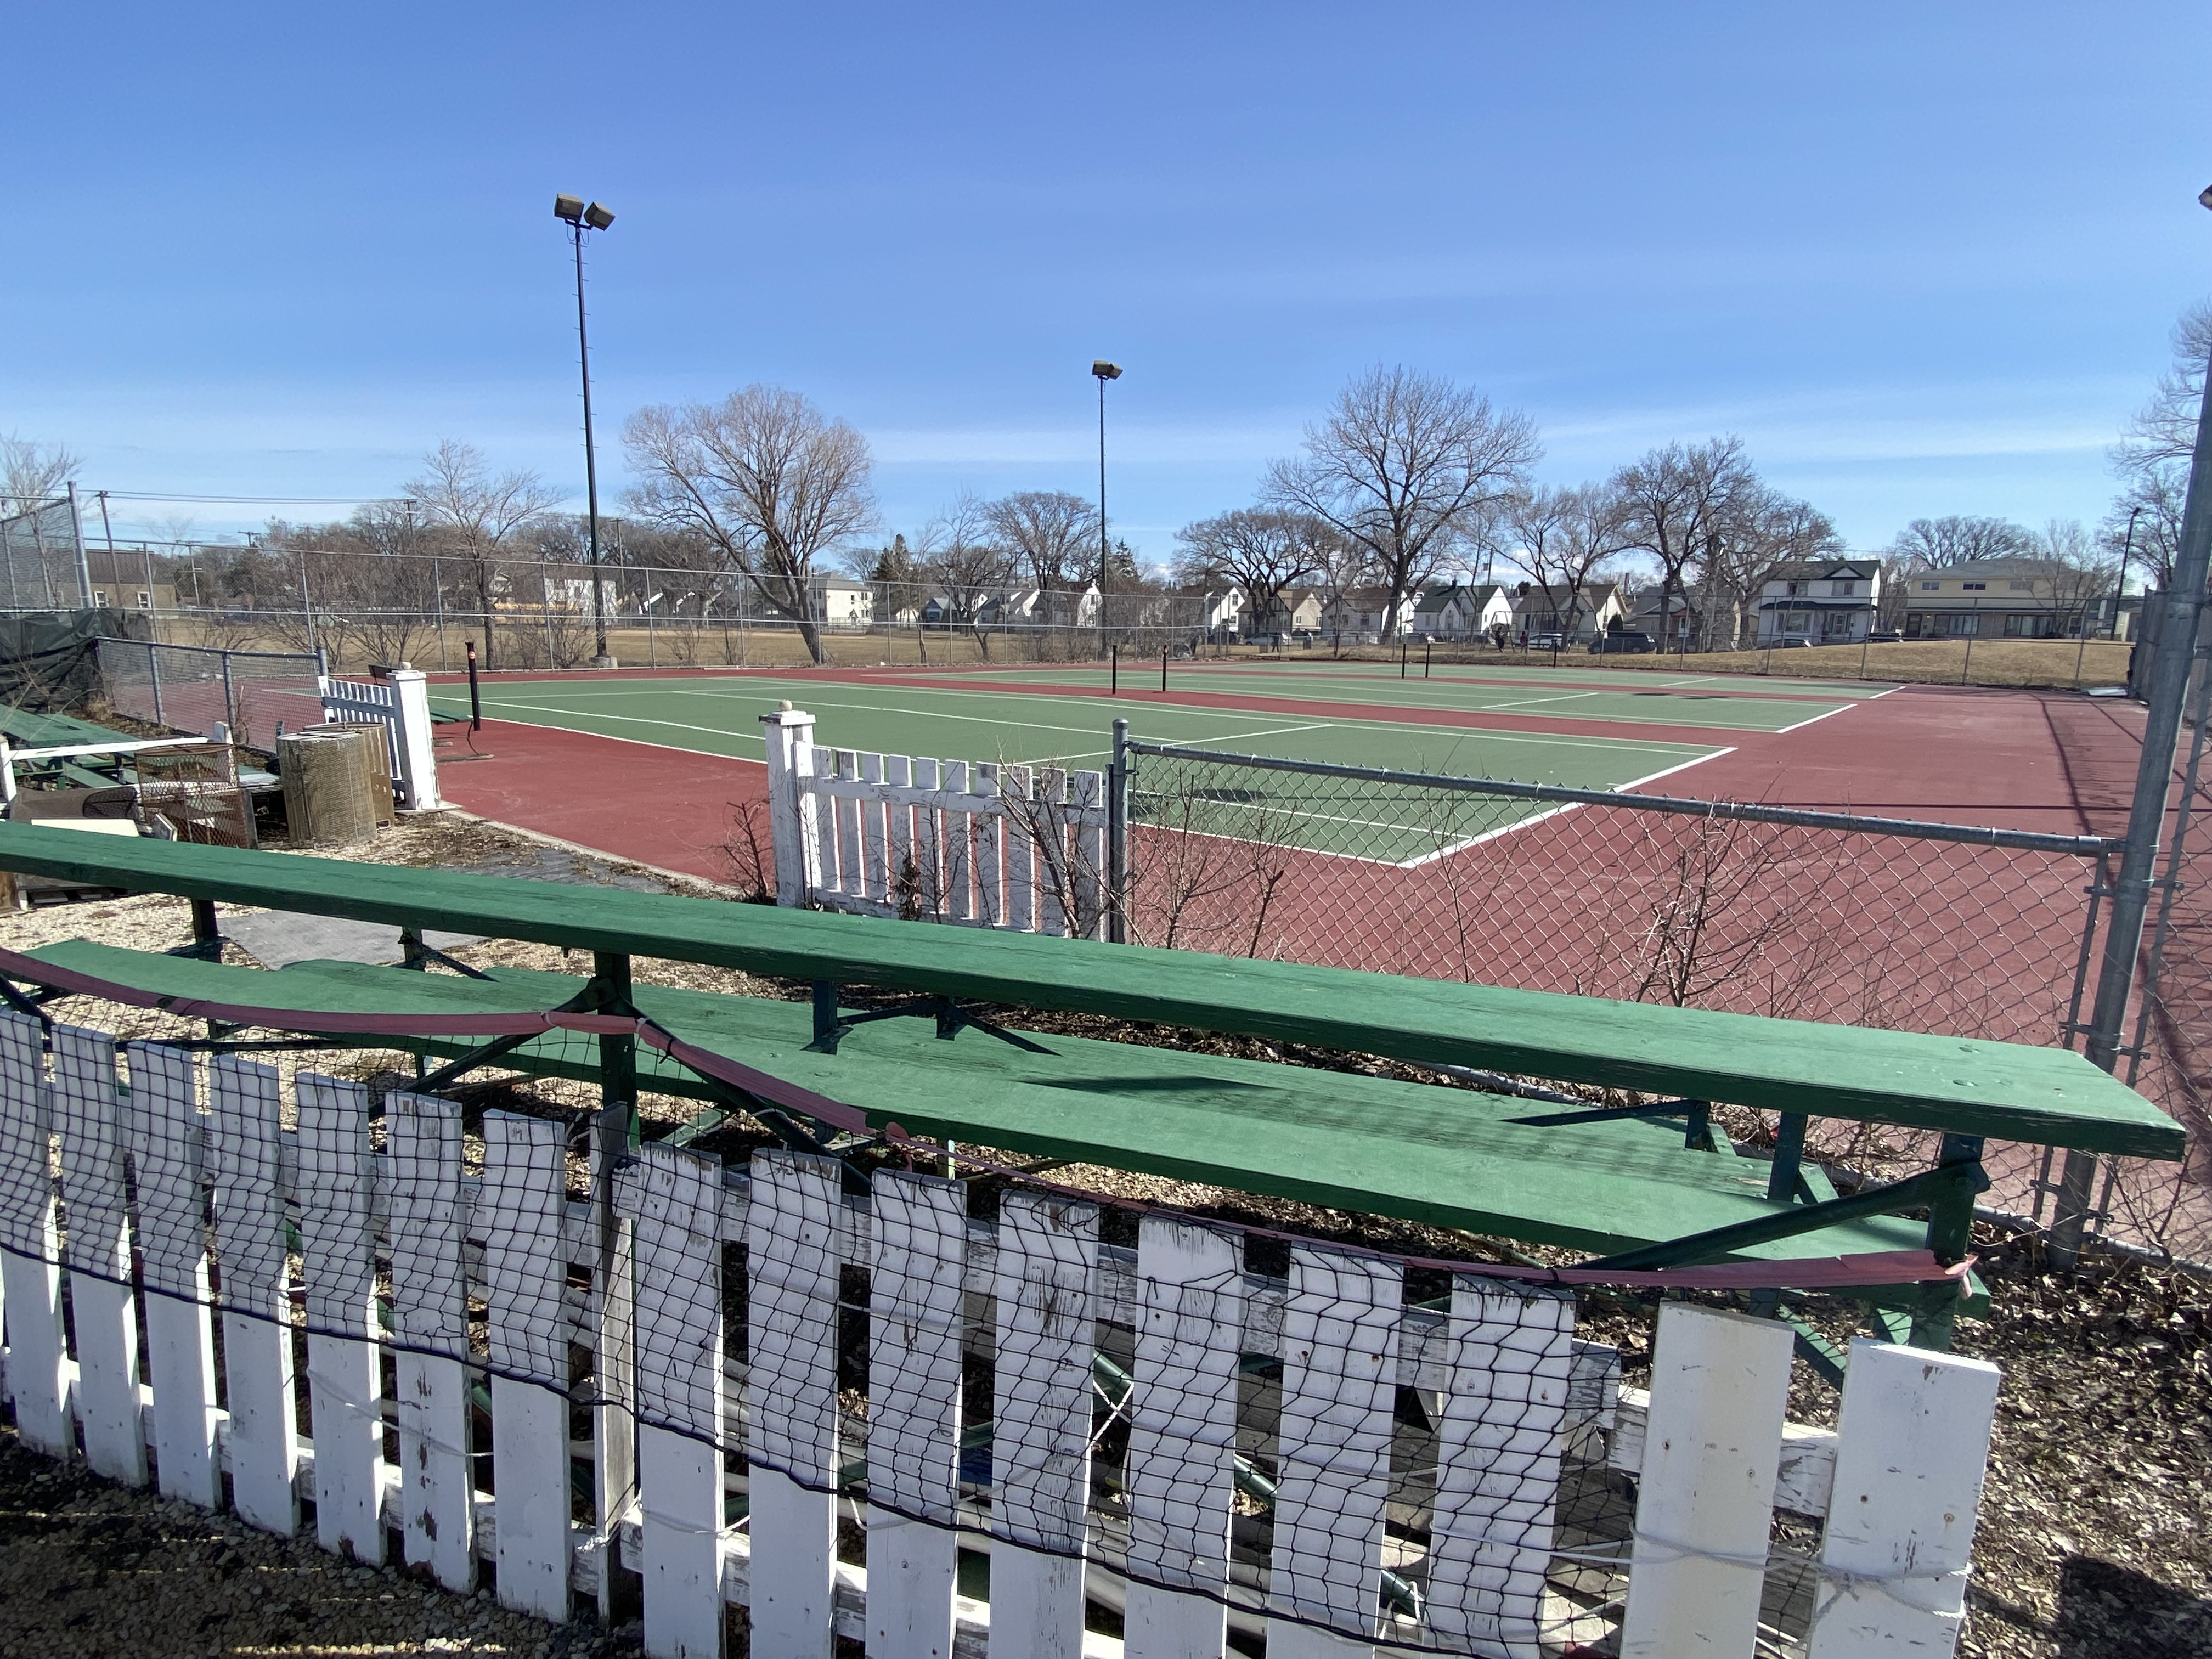 Private lease for Sargent Park Tennis Courts operation not renewed, 24-hour use enabled